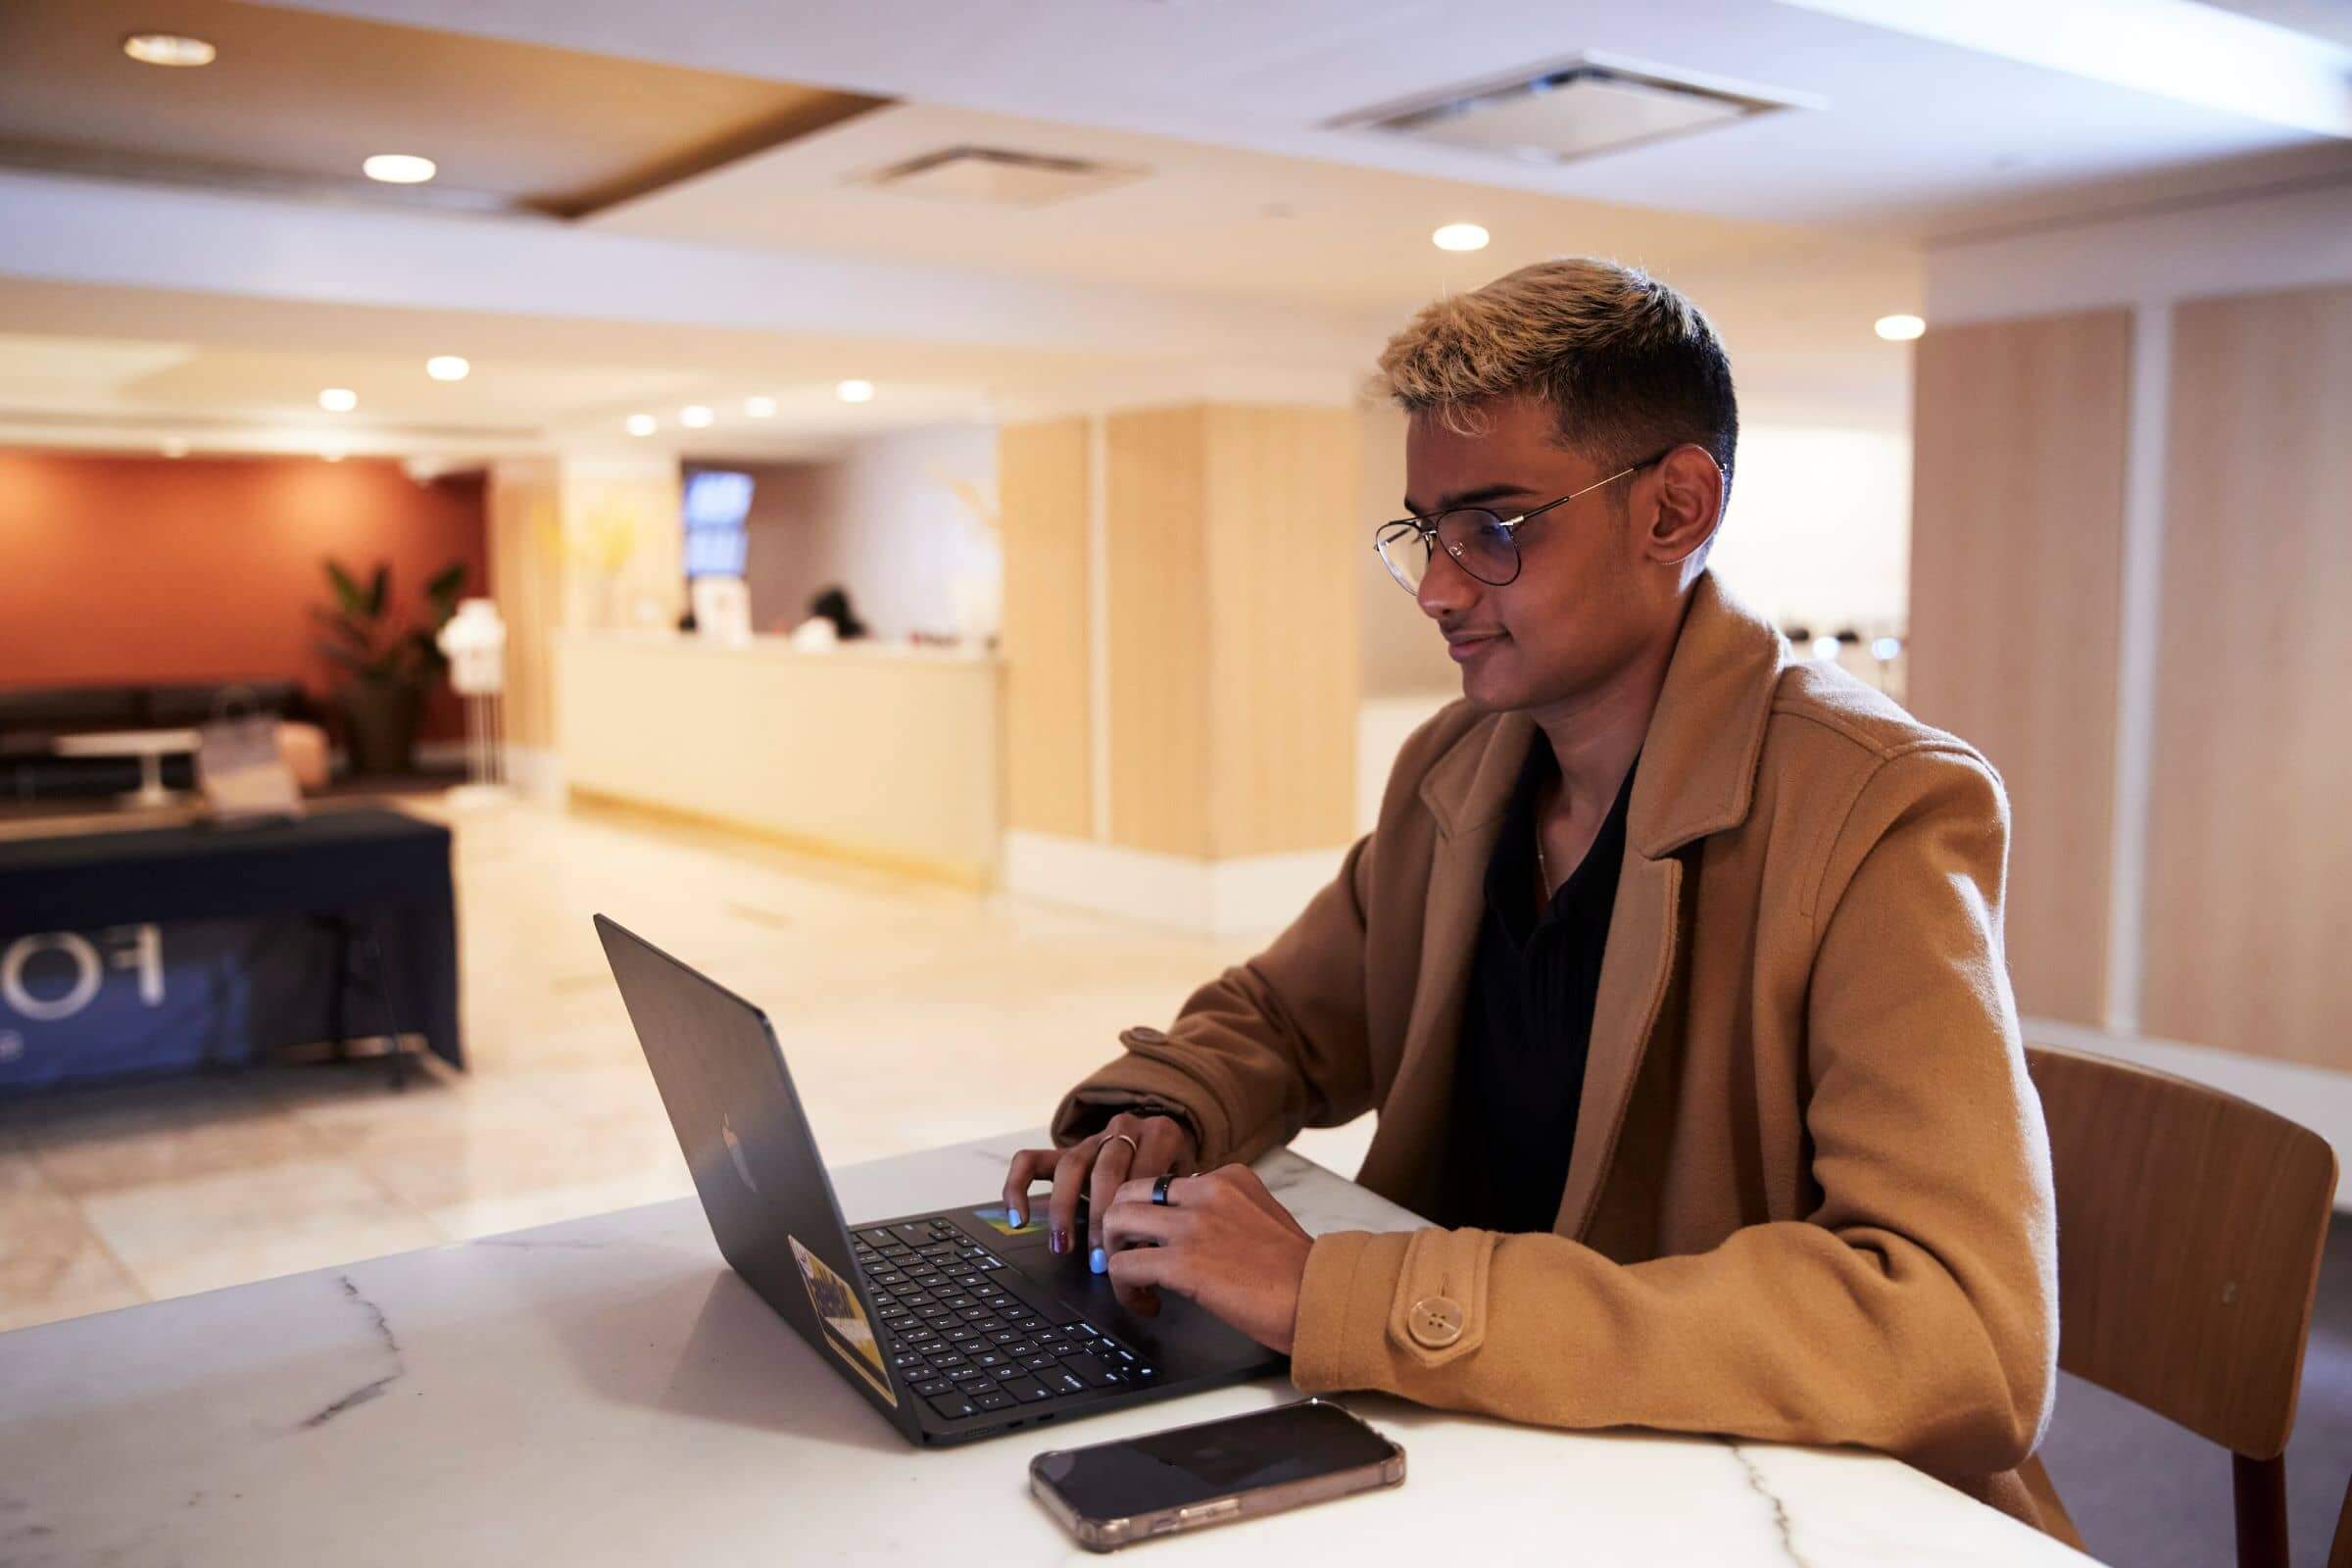 A LIM student types on a laptop whie sitting in the lobby of FOUND Study residential hall building in New York City